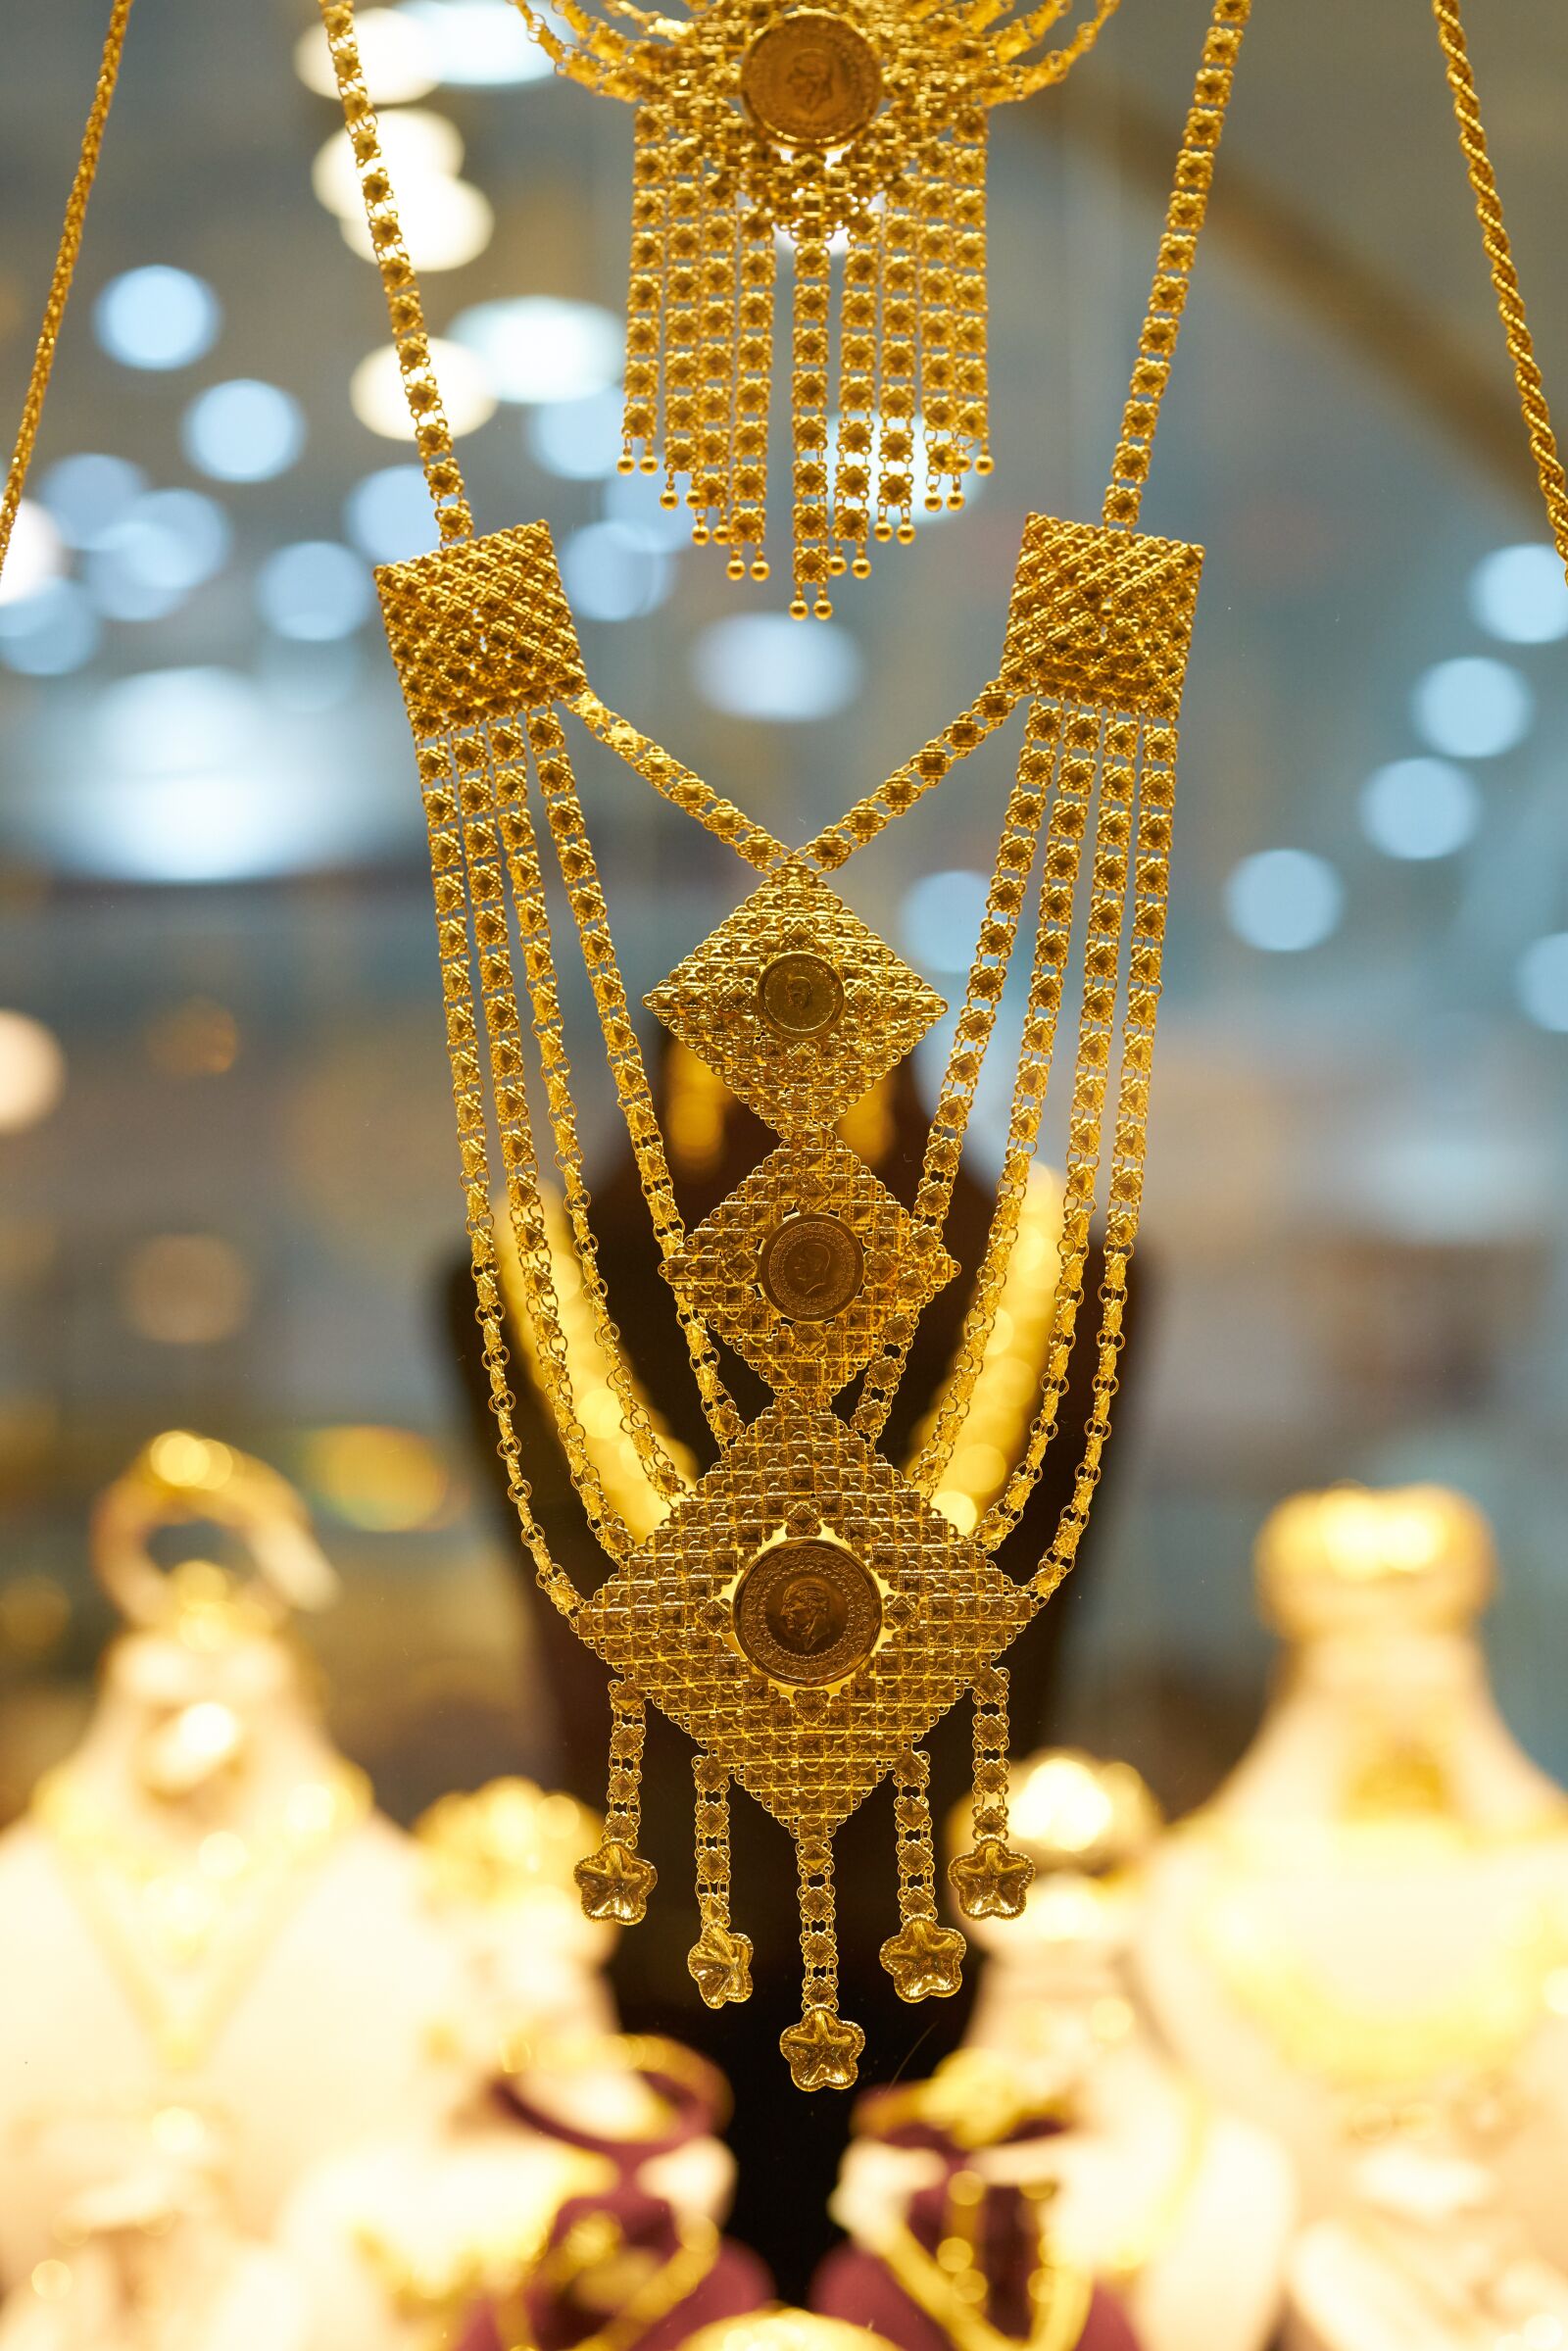 Sigma 85mm F1.4 DG HSM Art sample photo. Gold, necklace, expensive photography